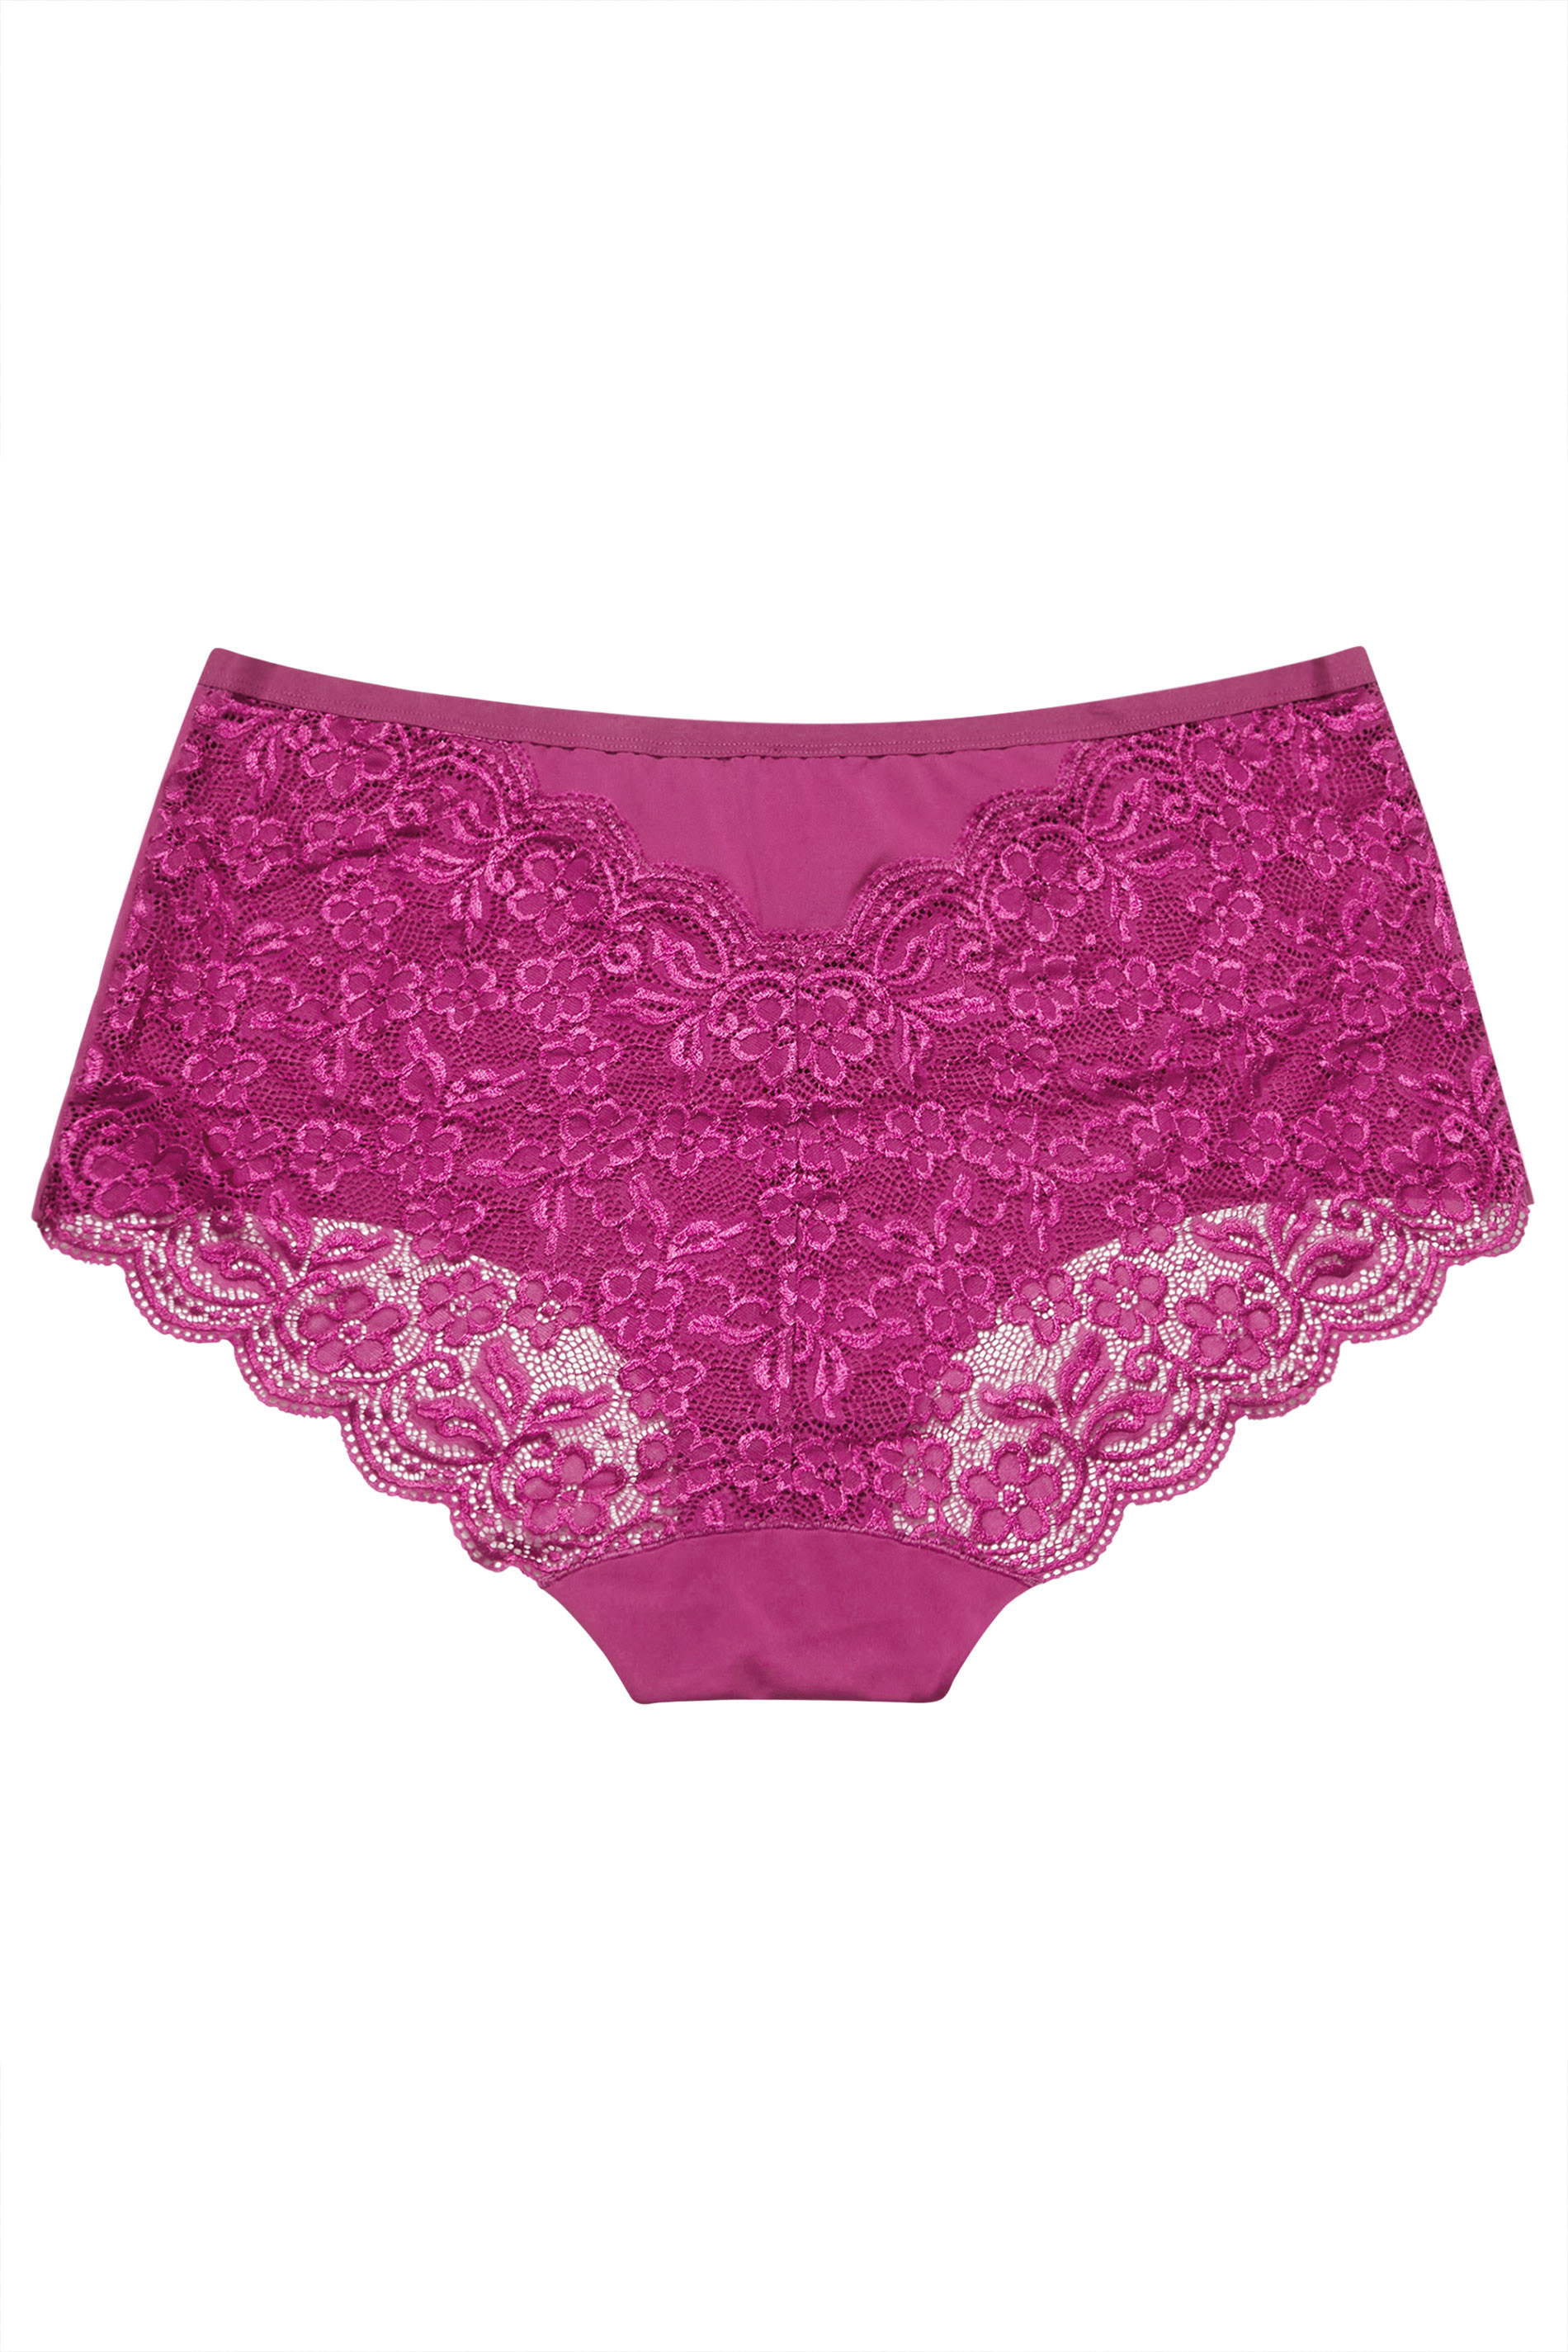 YOURS 3 PACK Plus Size Pink & Black Lace Back Full Briefs | Yours Clothing 3